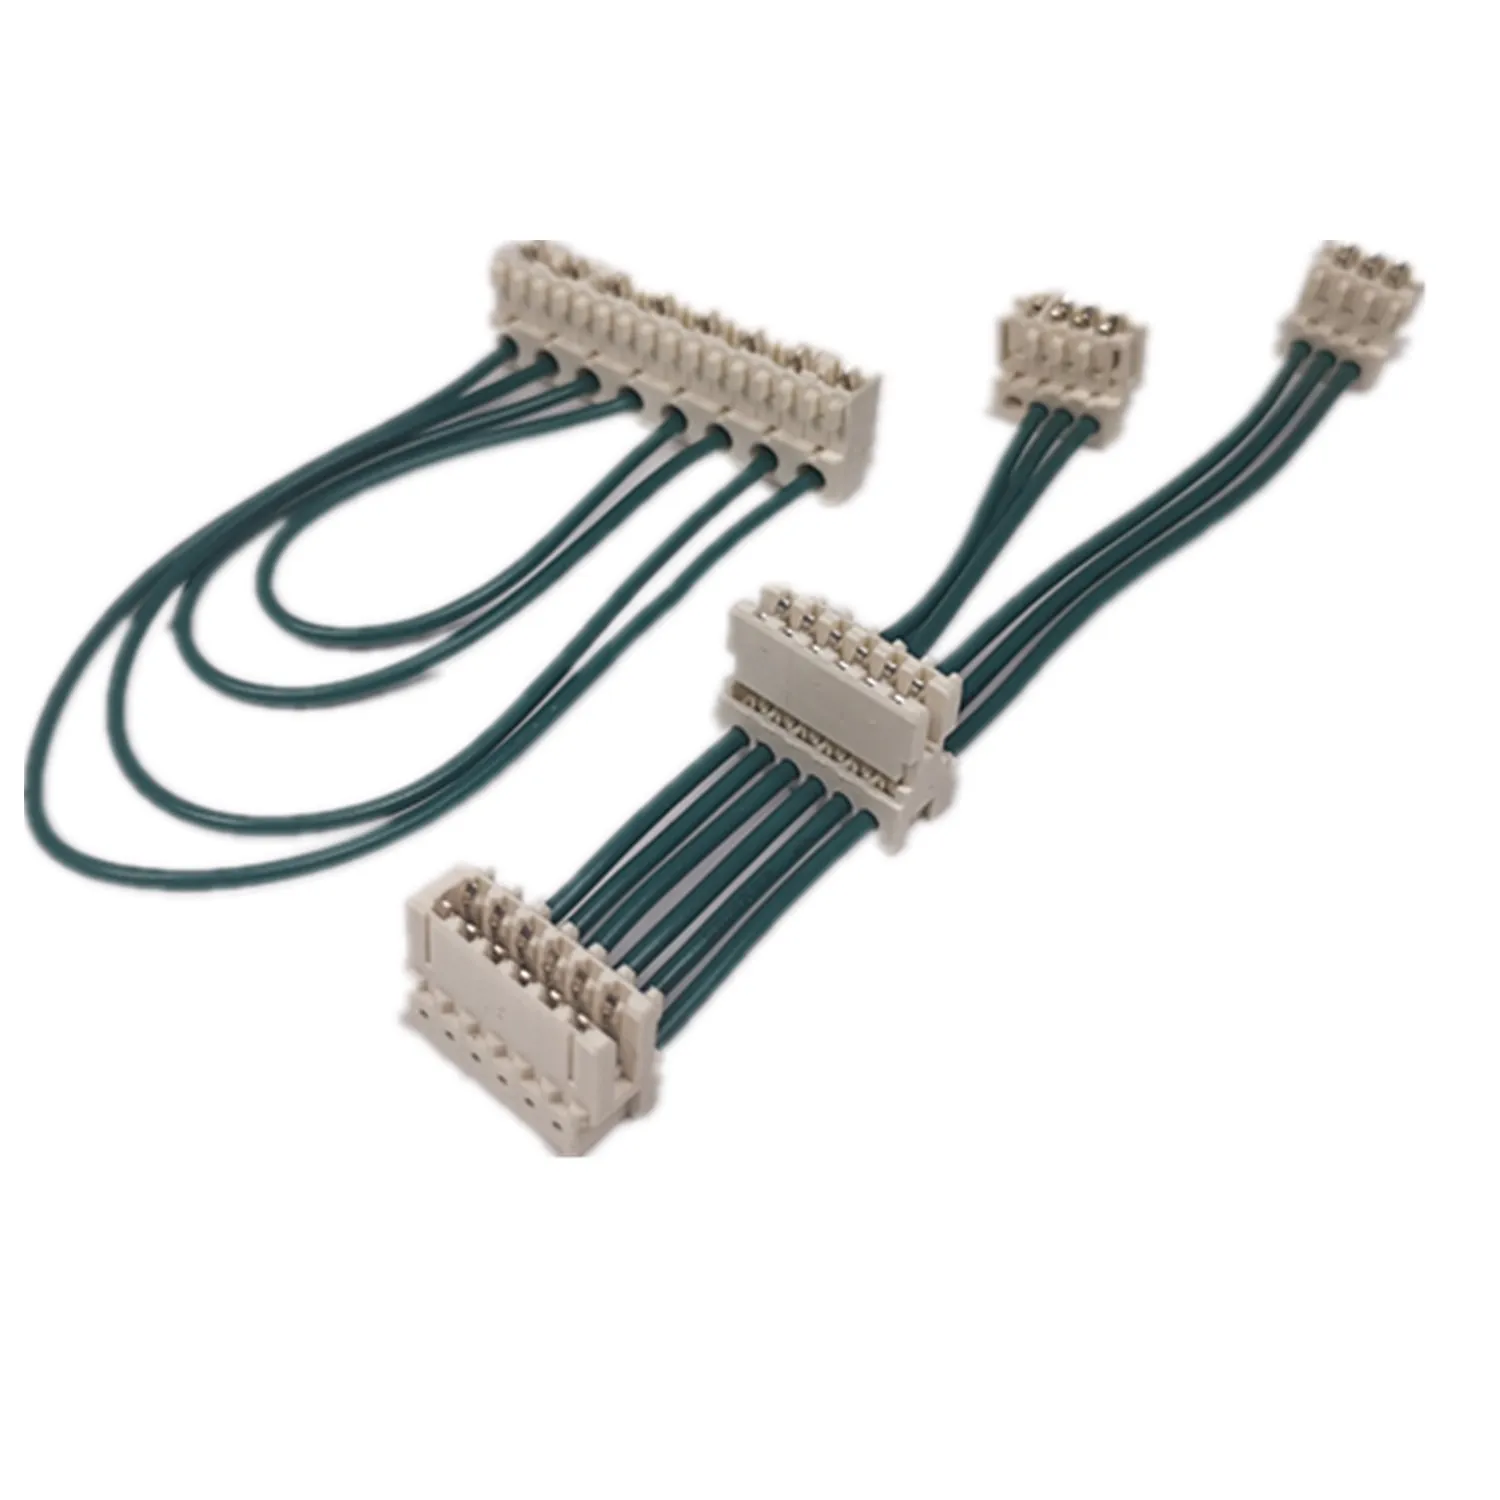 Lumberg Power connector with 2.54MM IDC flat Cable assembly for PCB wireharness manufacturer with WHMA/IPC620